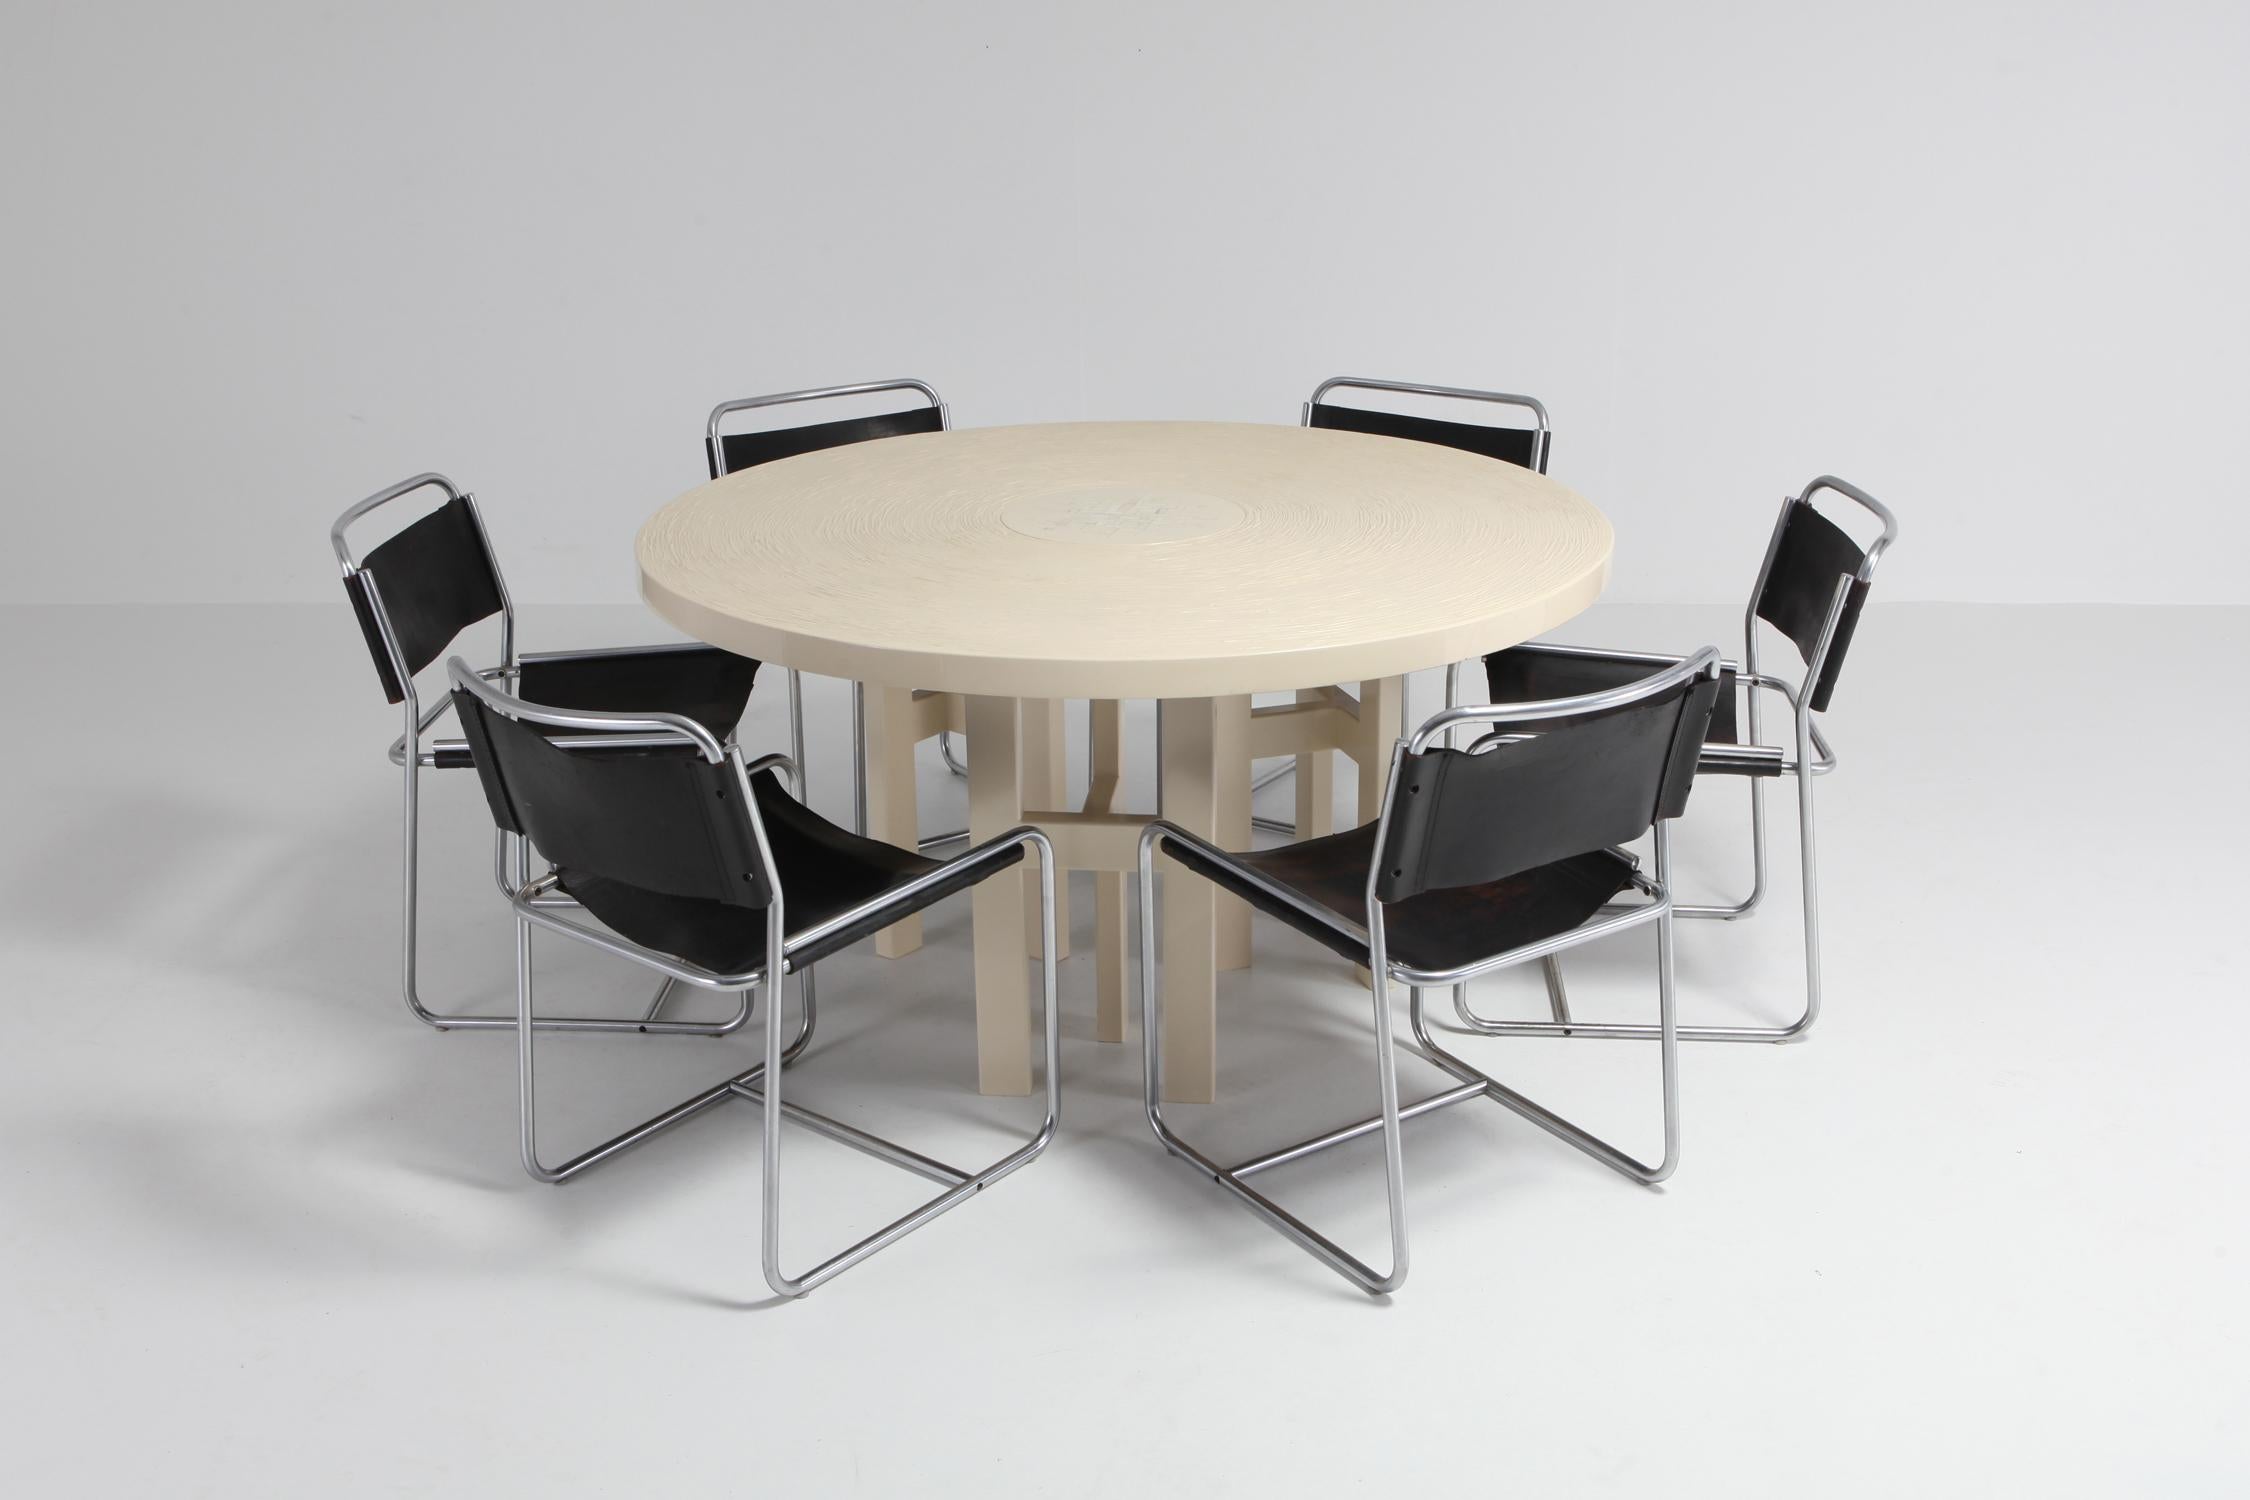 Jean Claude Dresse Exceptional Resin Dining Table 2